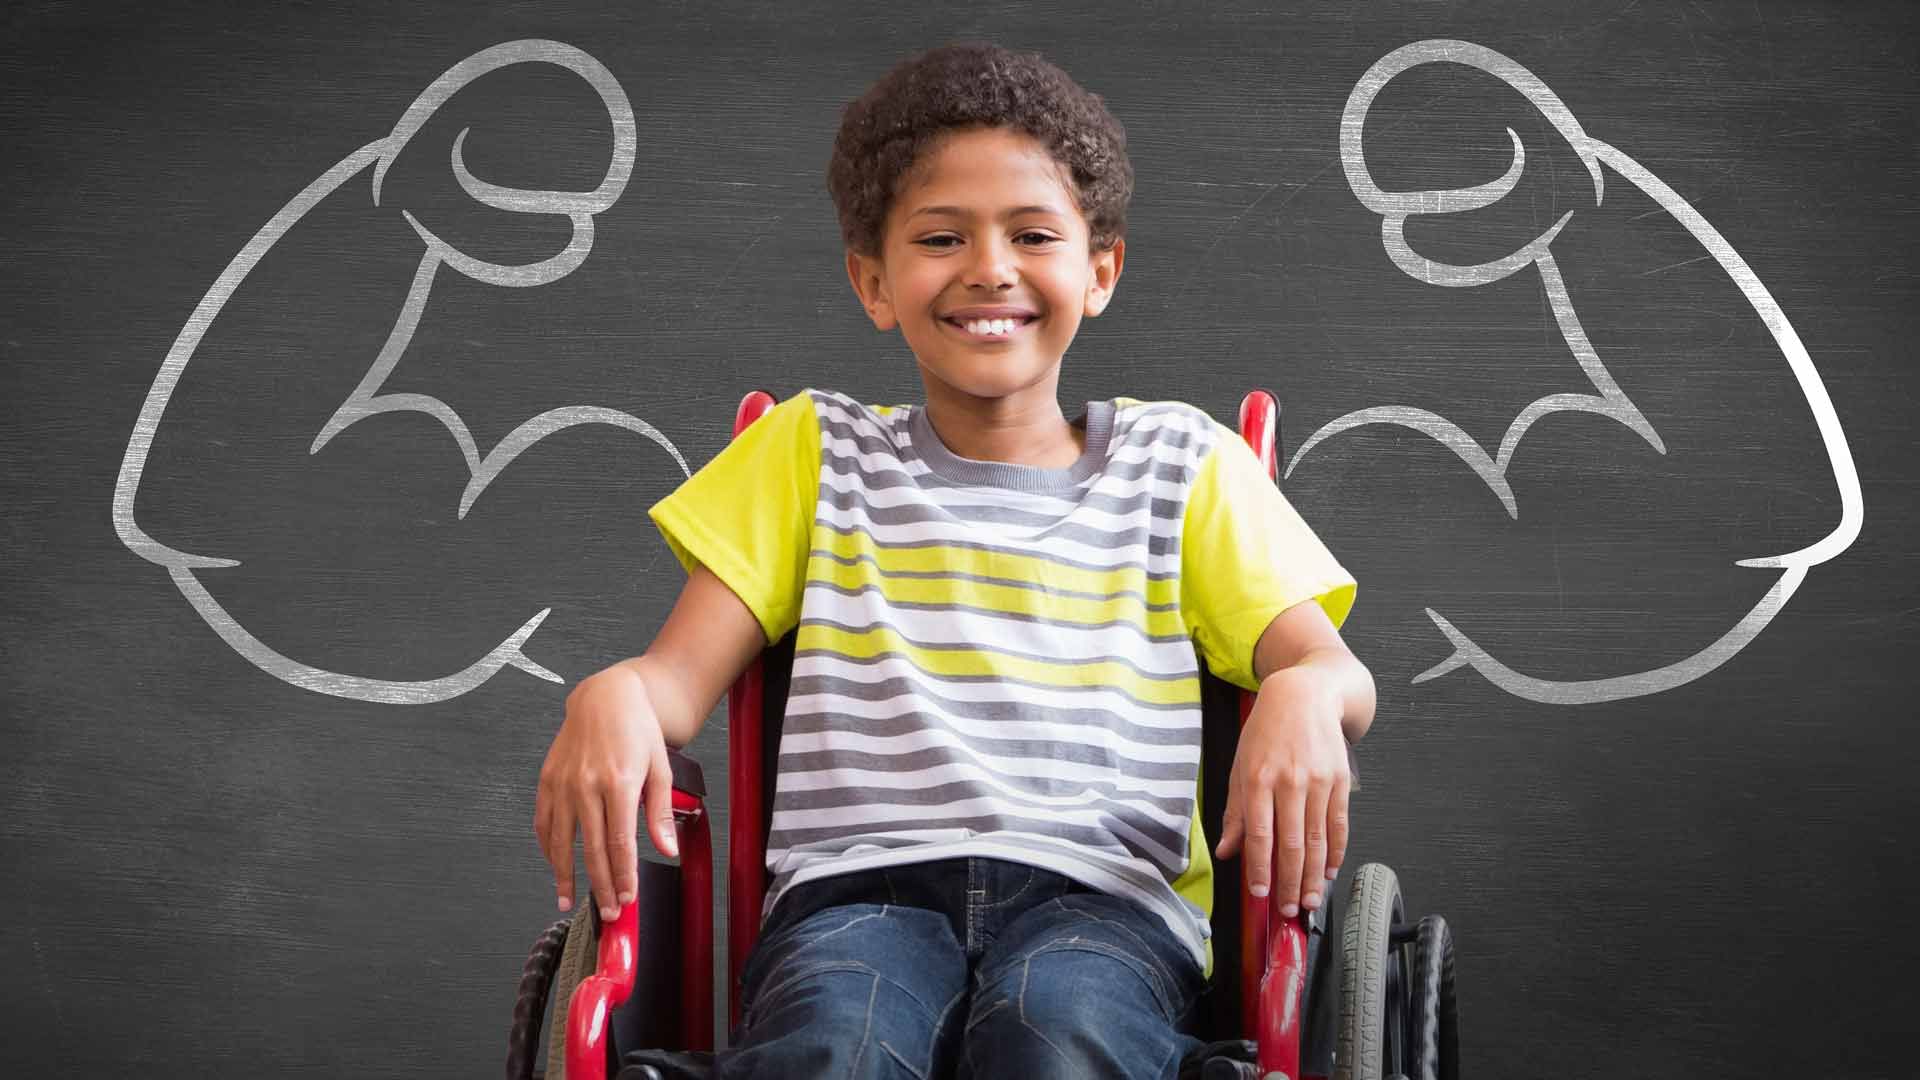 Do Children With Disabilities Suffer?